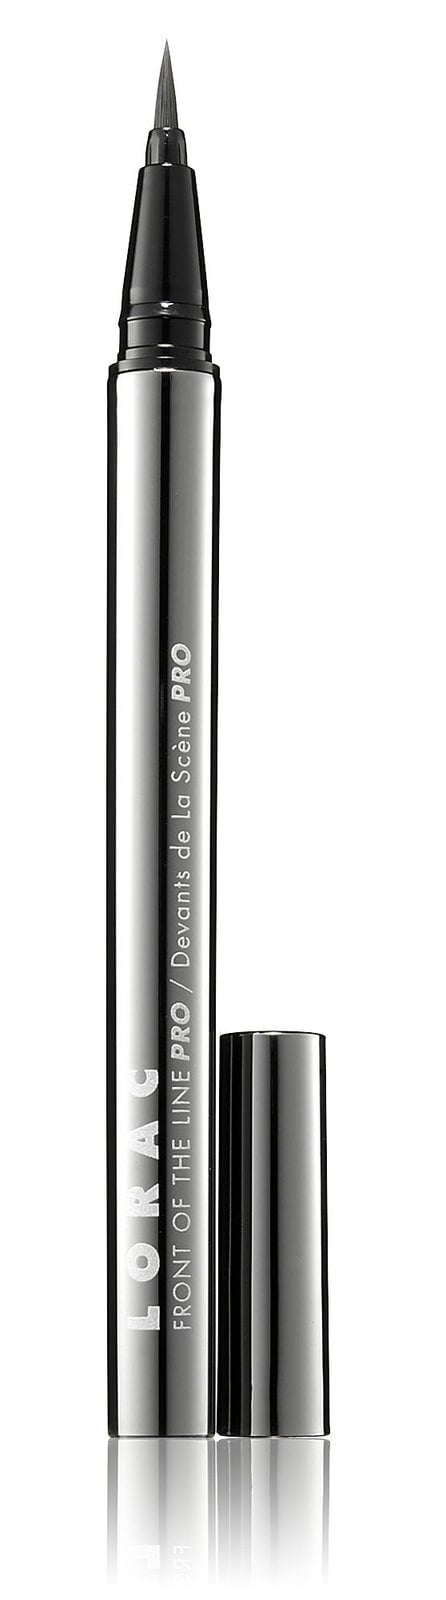 Lorac Front of the Line Pro Eyeliner